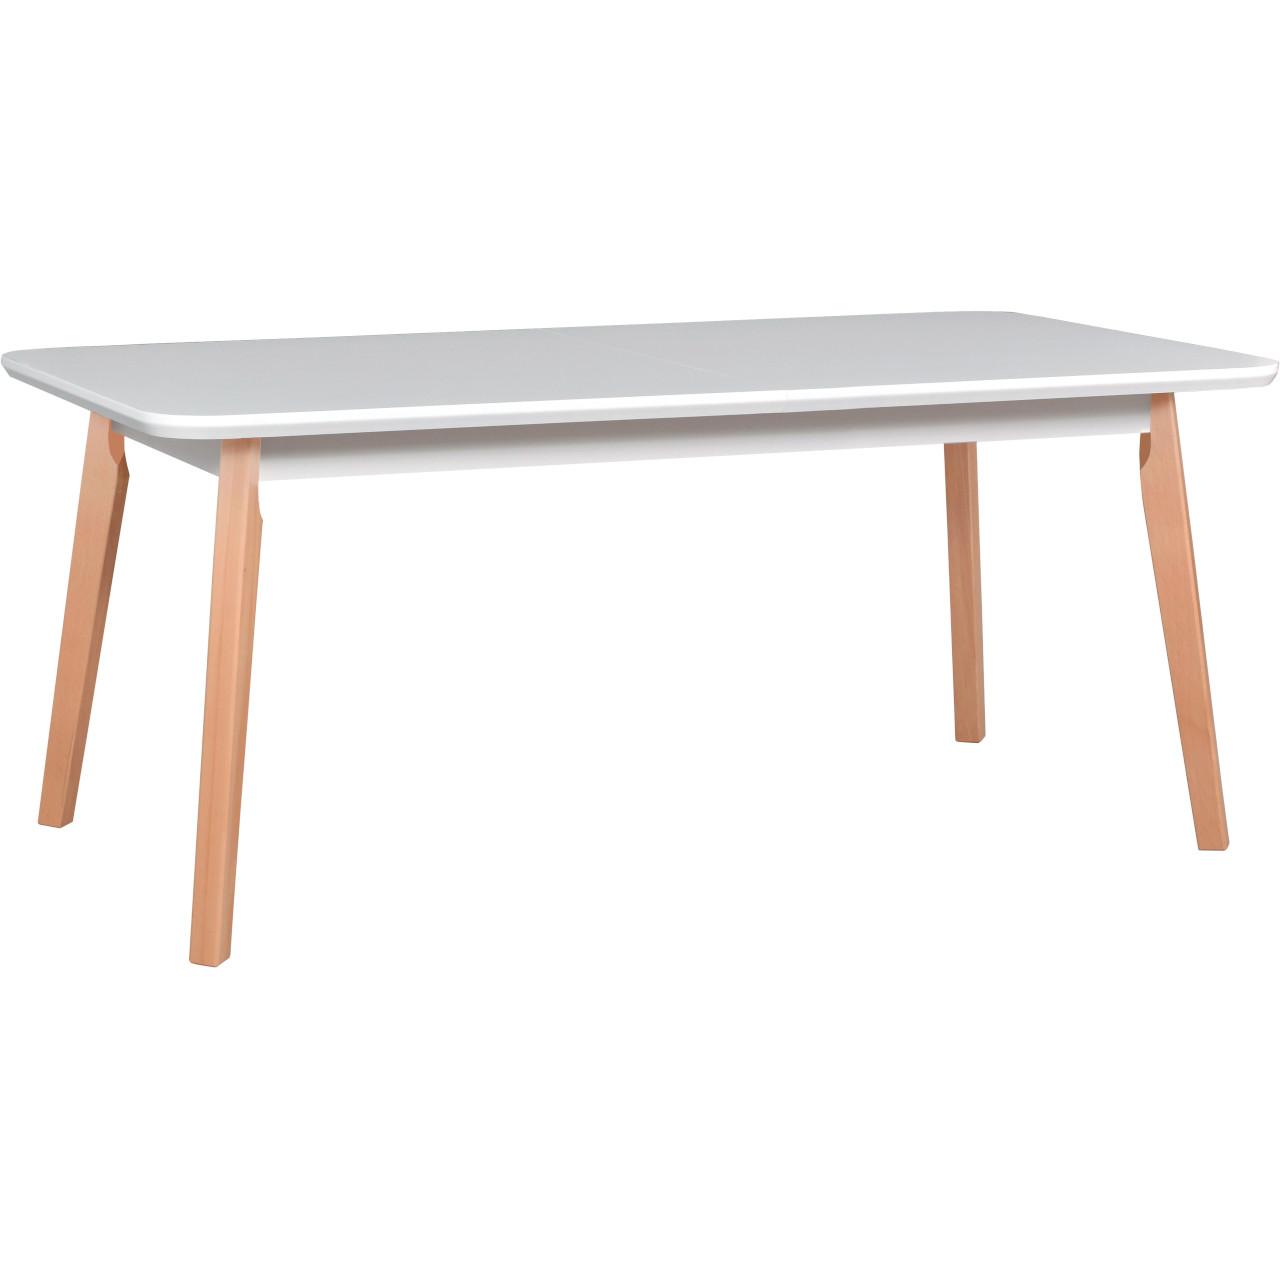 Table OSLO 8 90x160/200 white MDF / natural beech